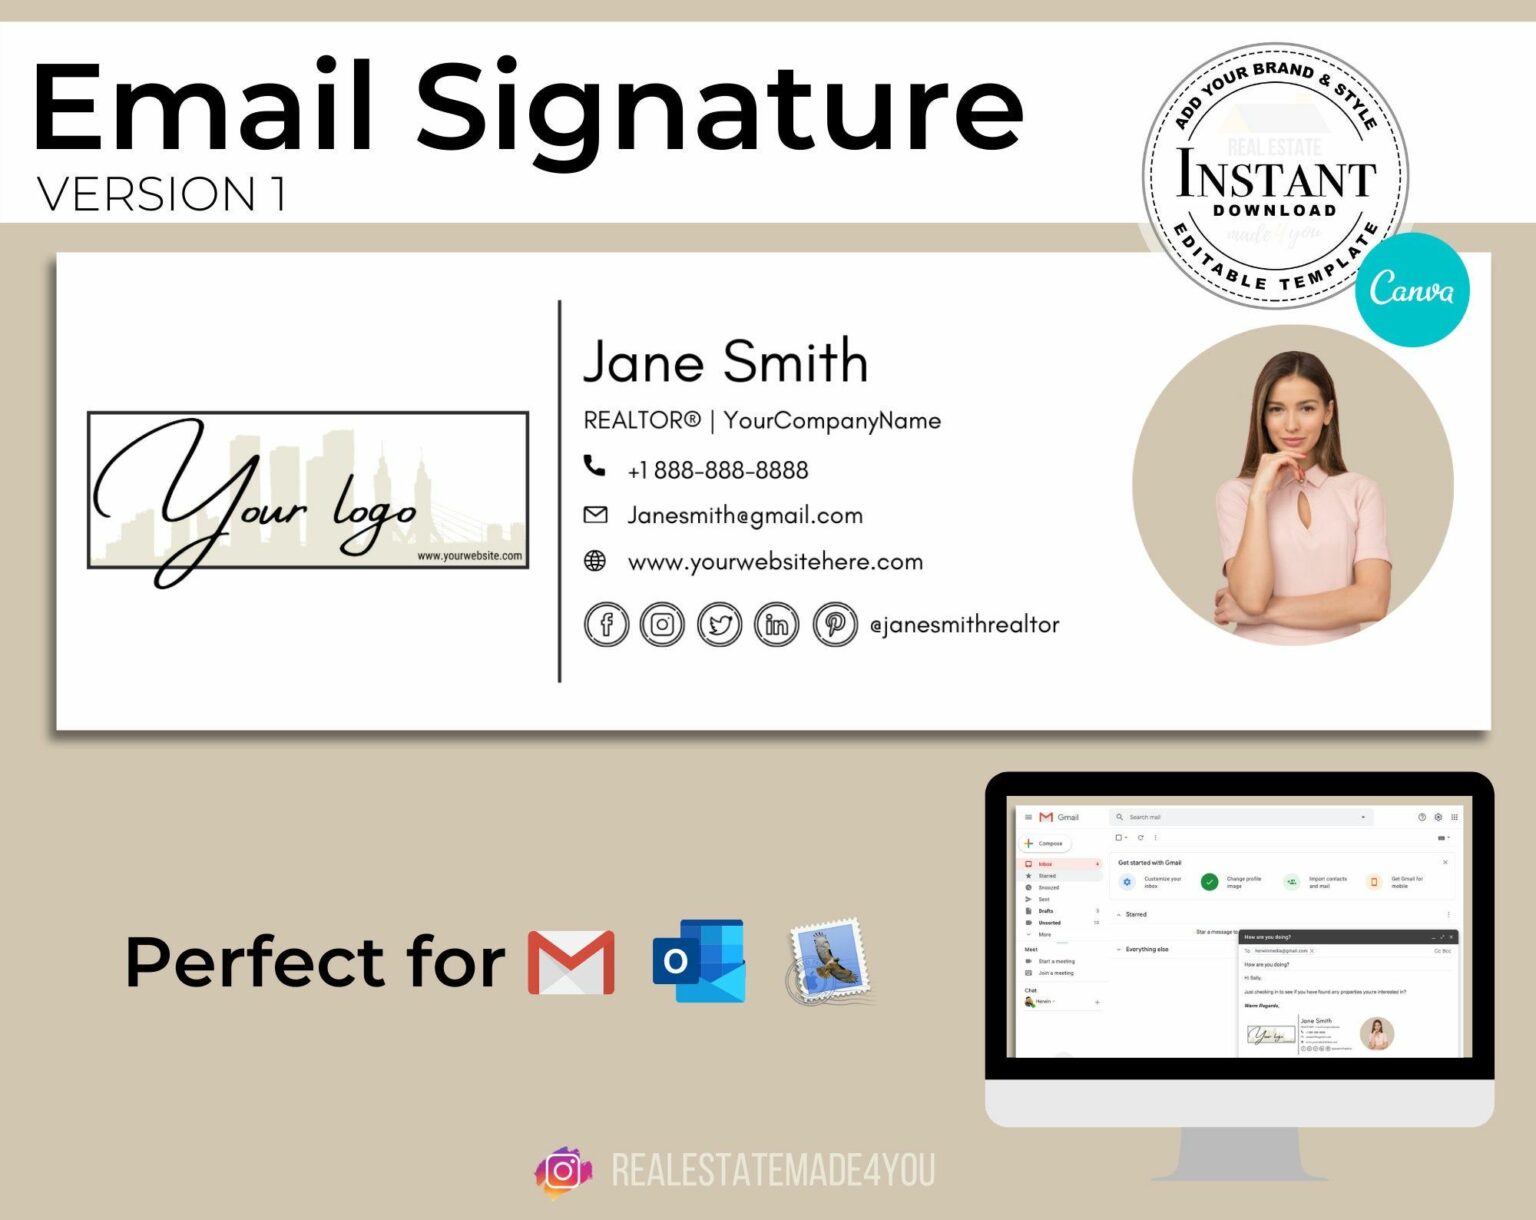 how to add an email signature for outlook